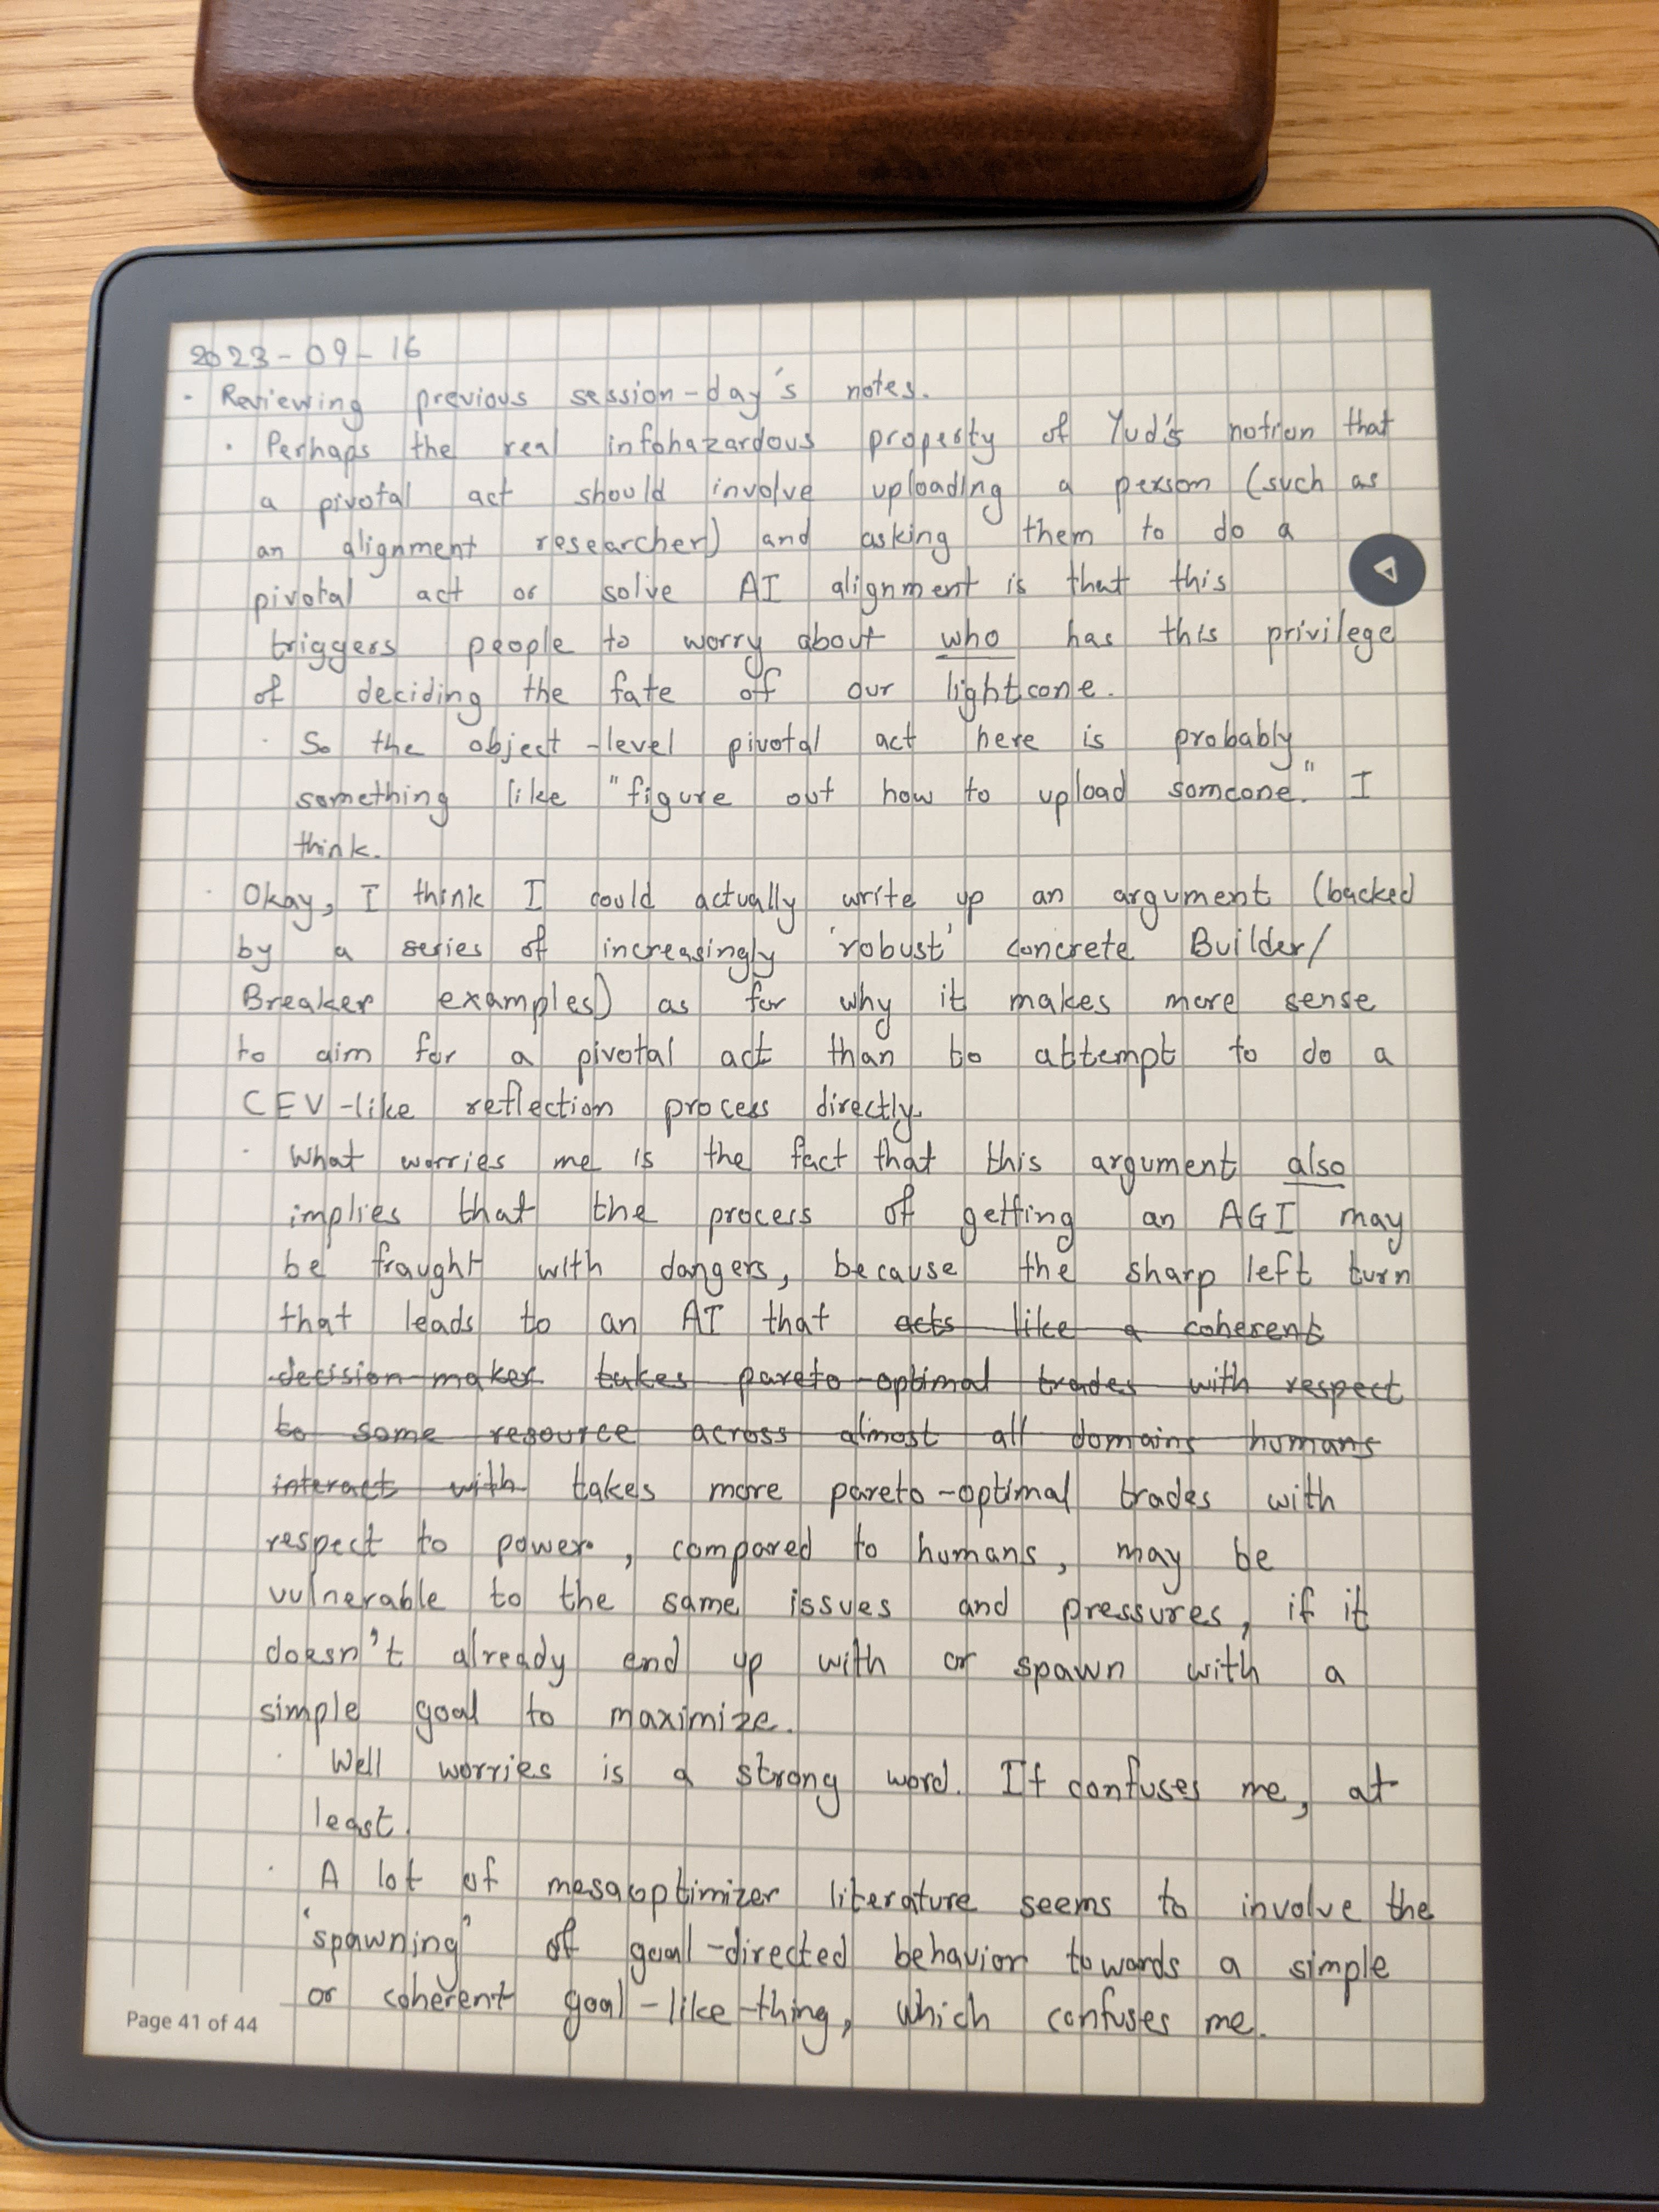 A Kindle Scribe with my written notes on it